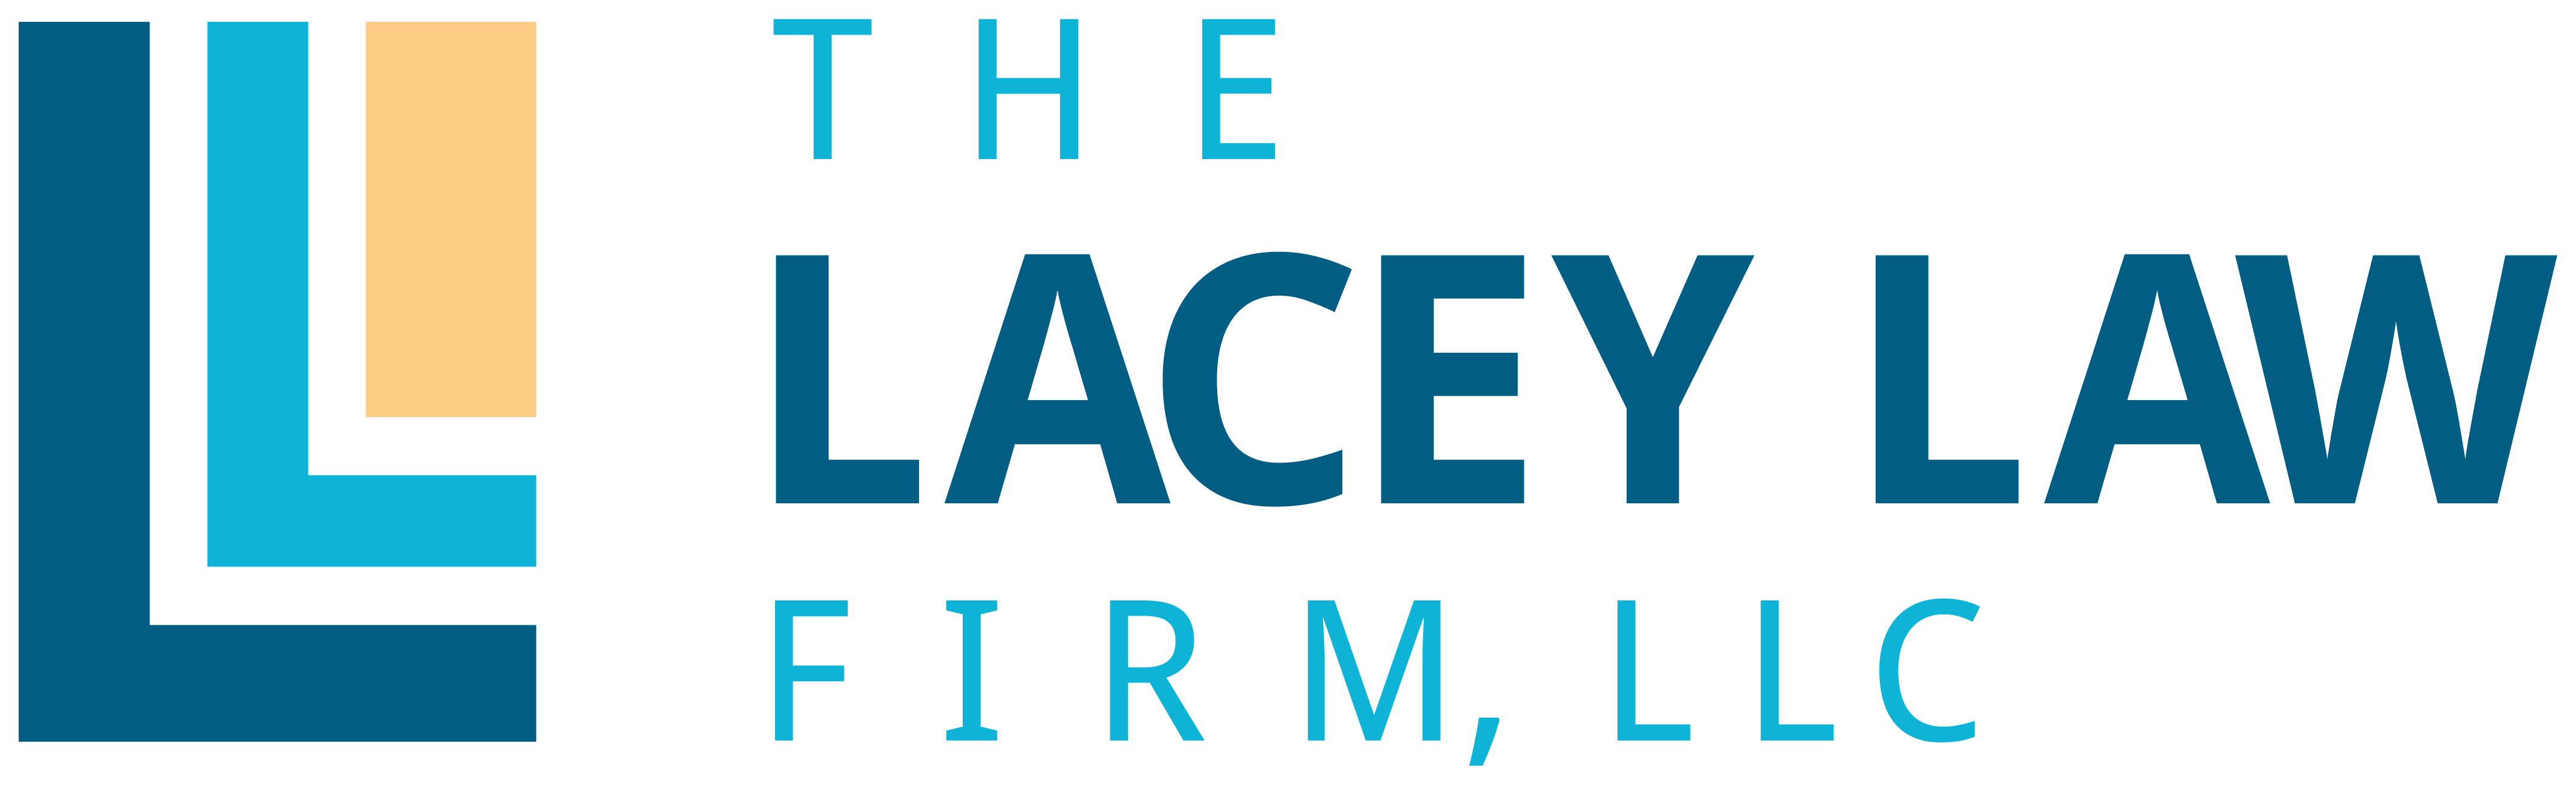 The Lacey Law Firm